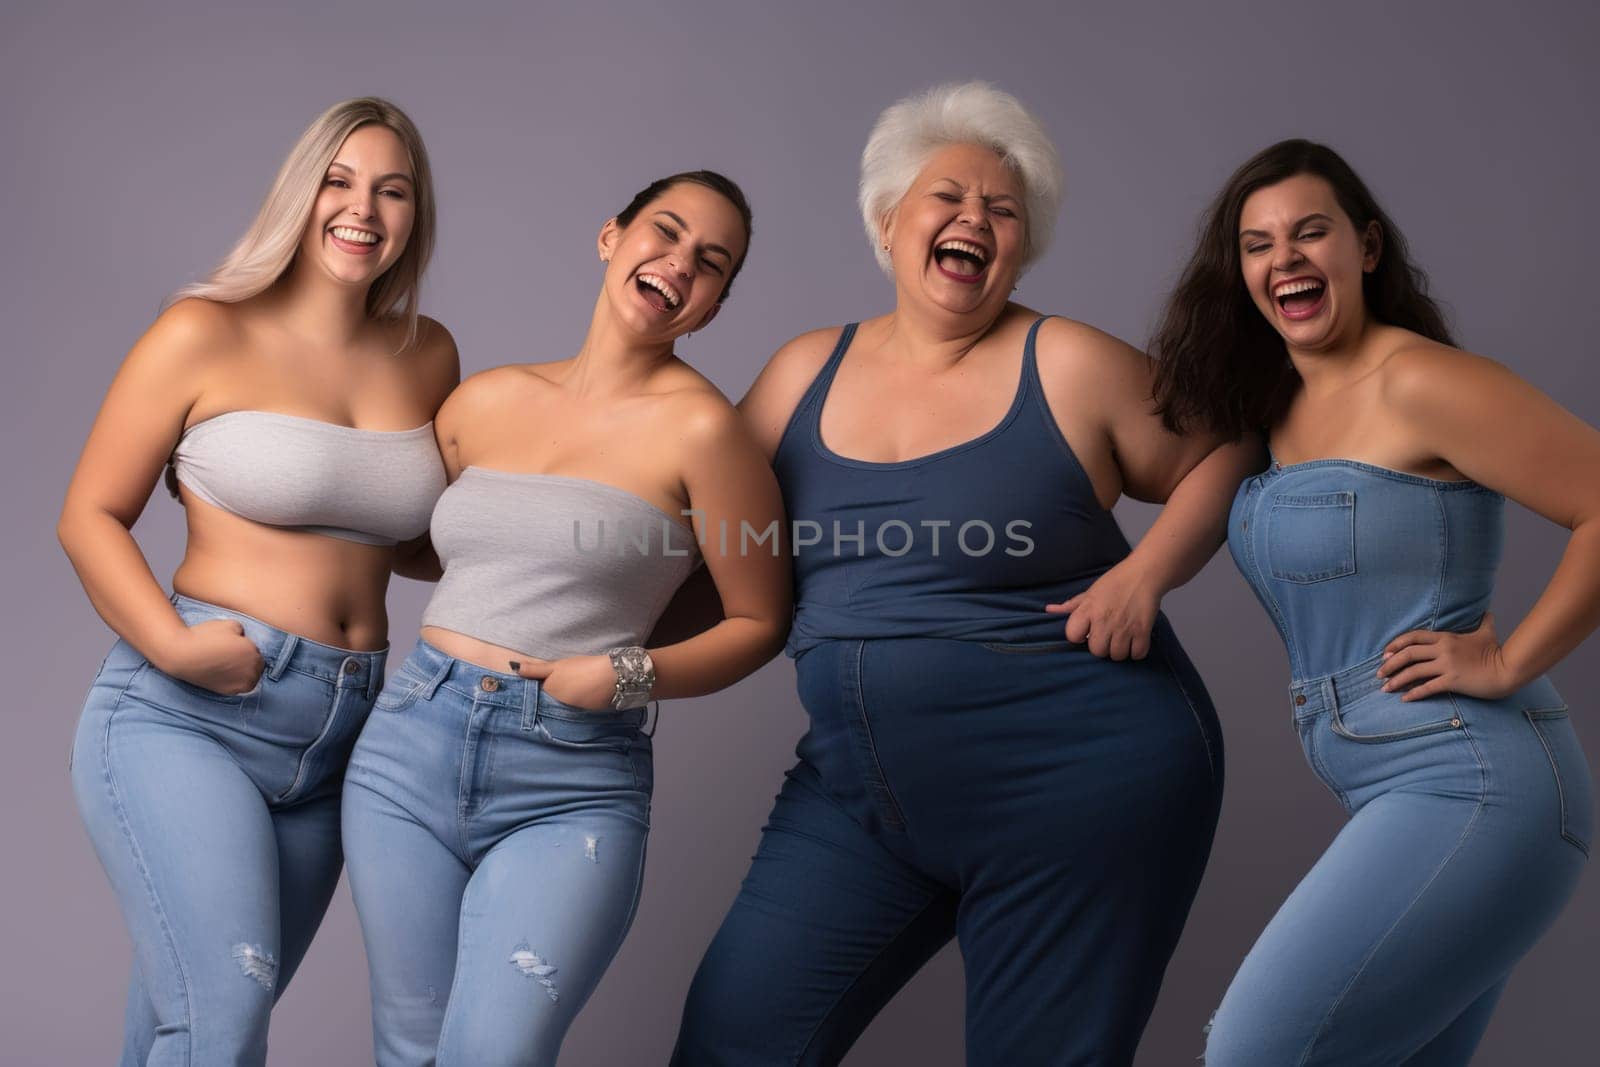 Happy plus size women. The concept of equality. High quality photo